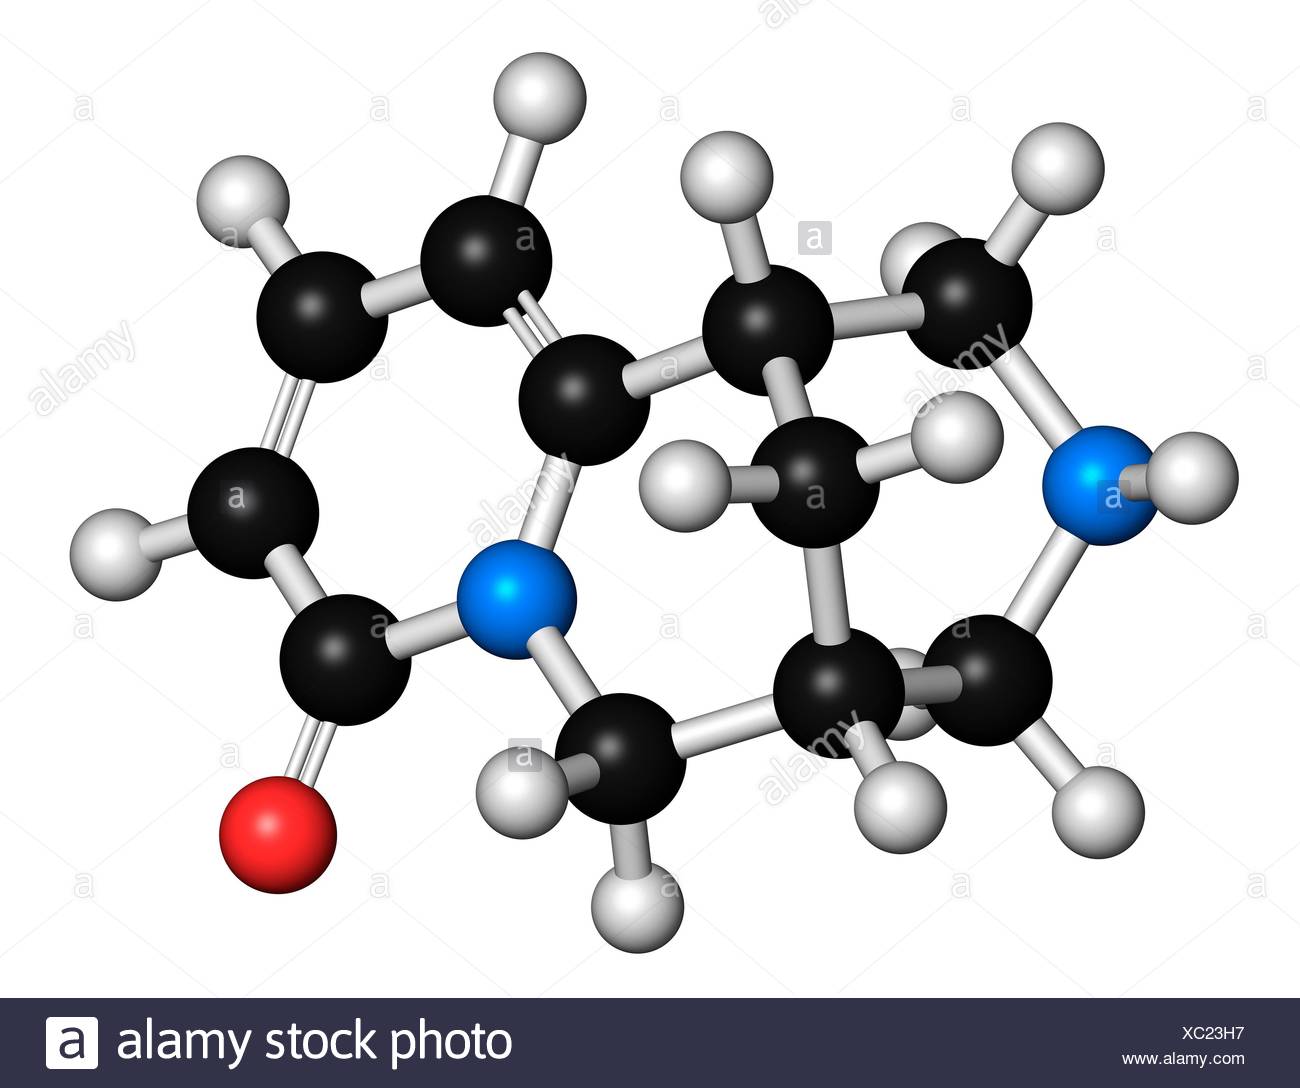 Cytisine - Molecule of the Month - March 2019 (HTML version)